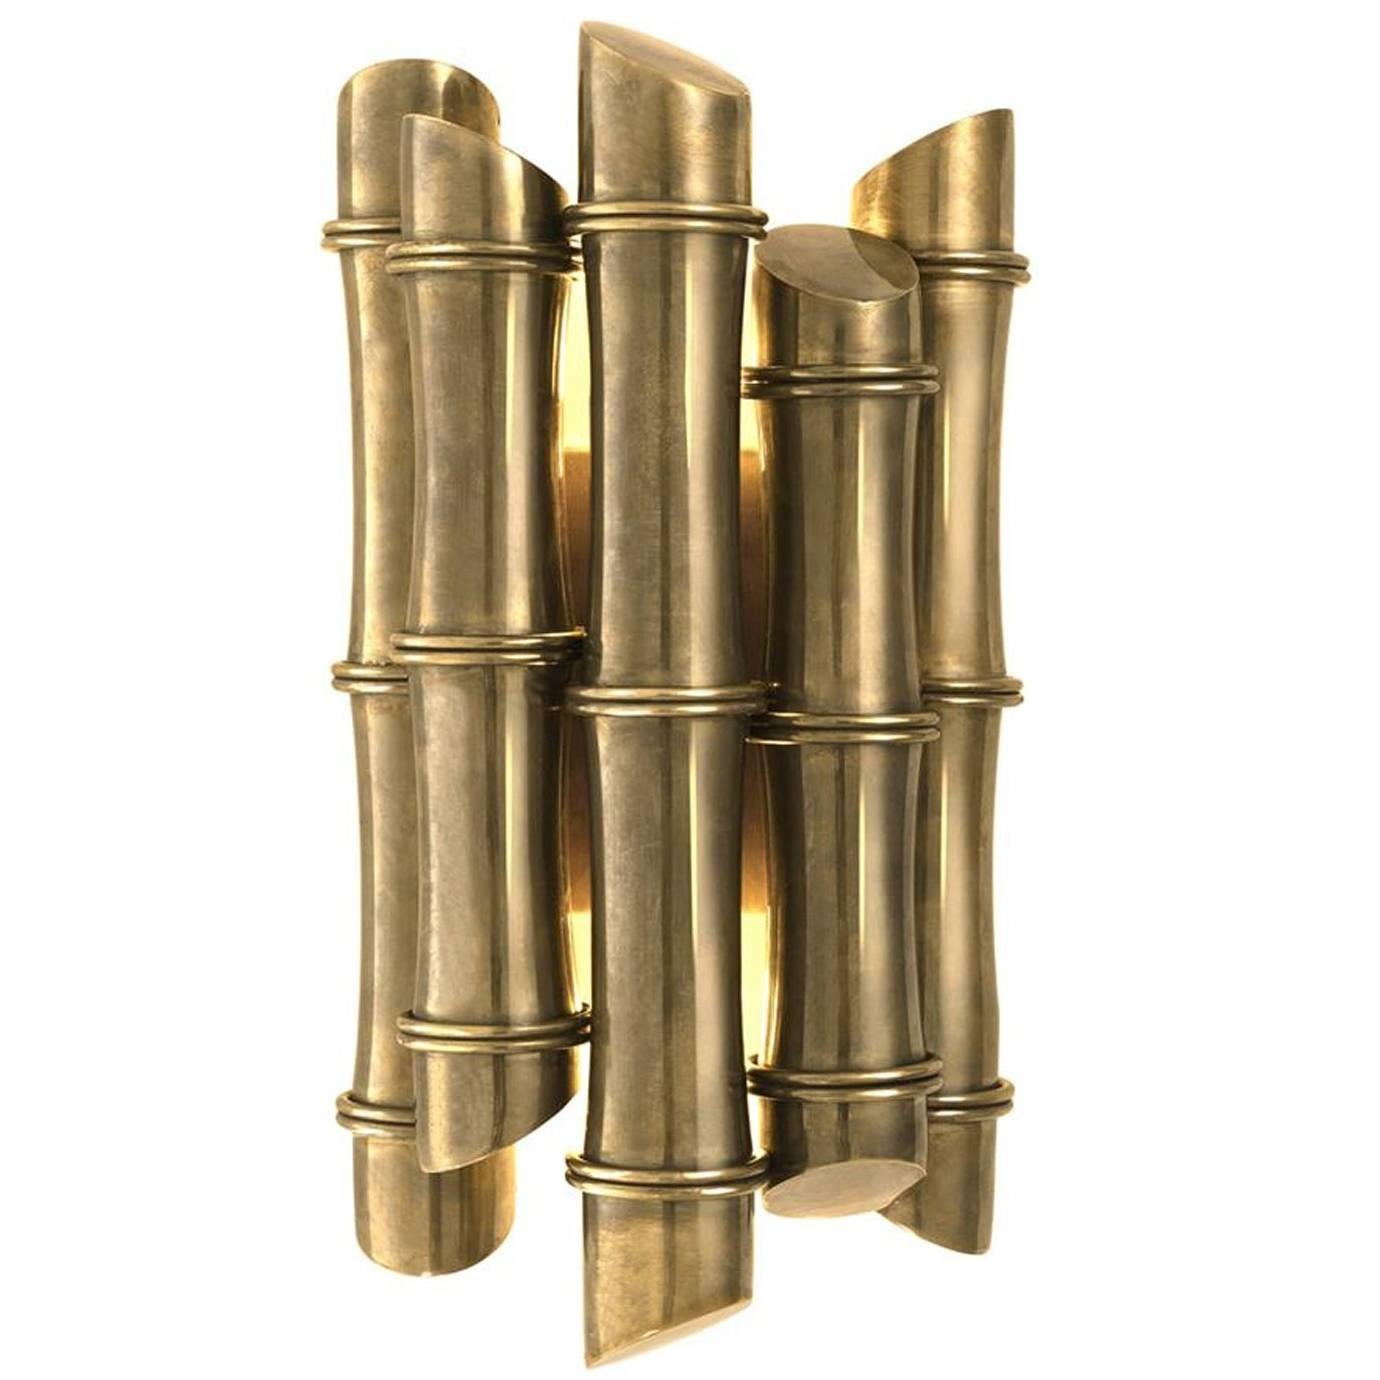 Spa Wall Light in Vintage Brass or Polished Stainless Steel Finish For Sale